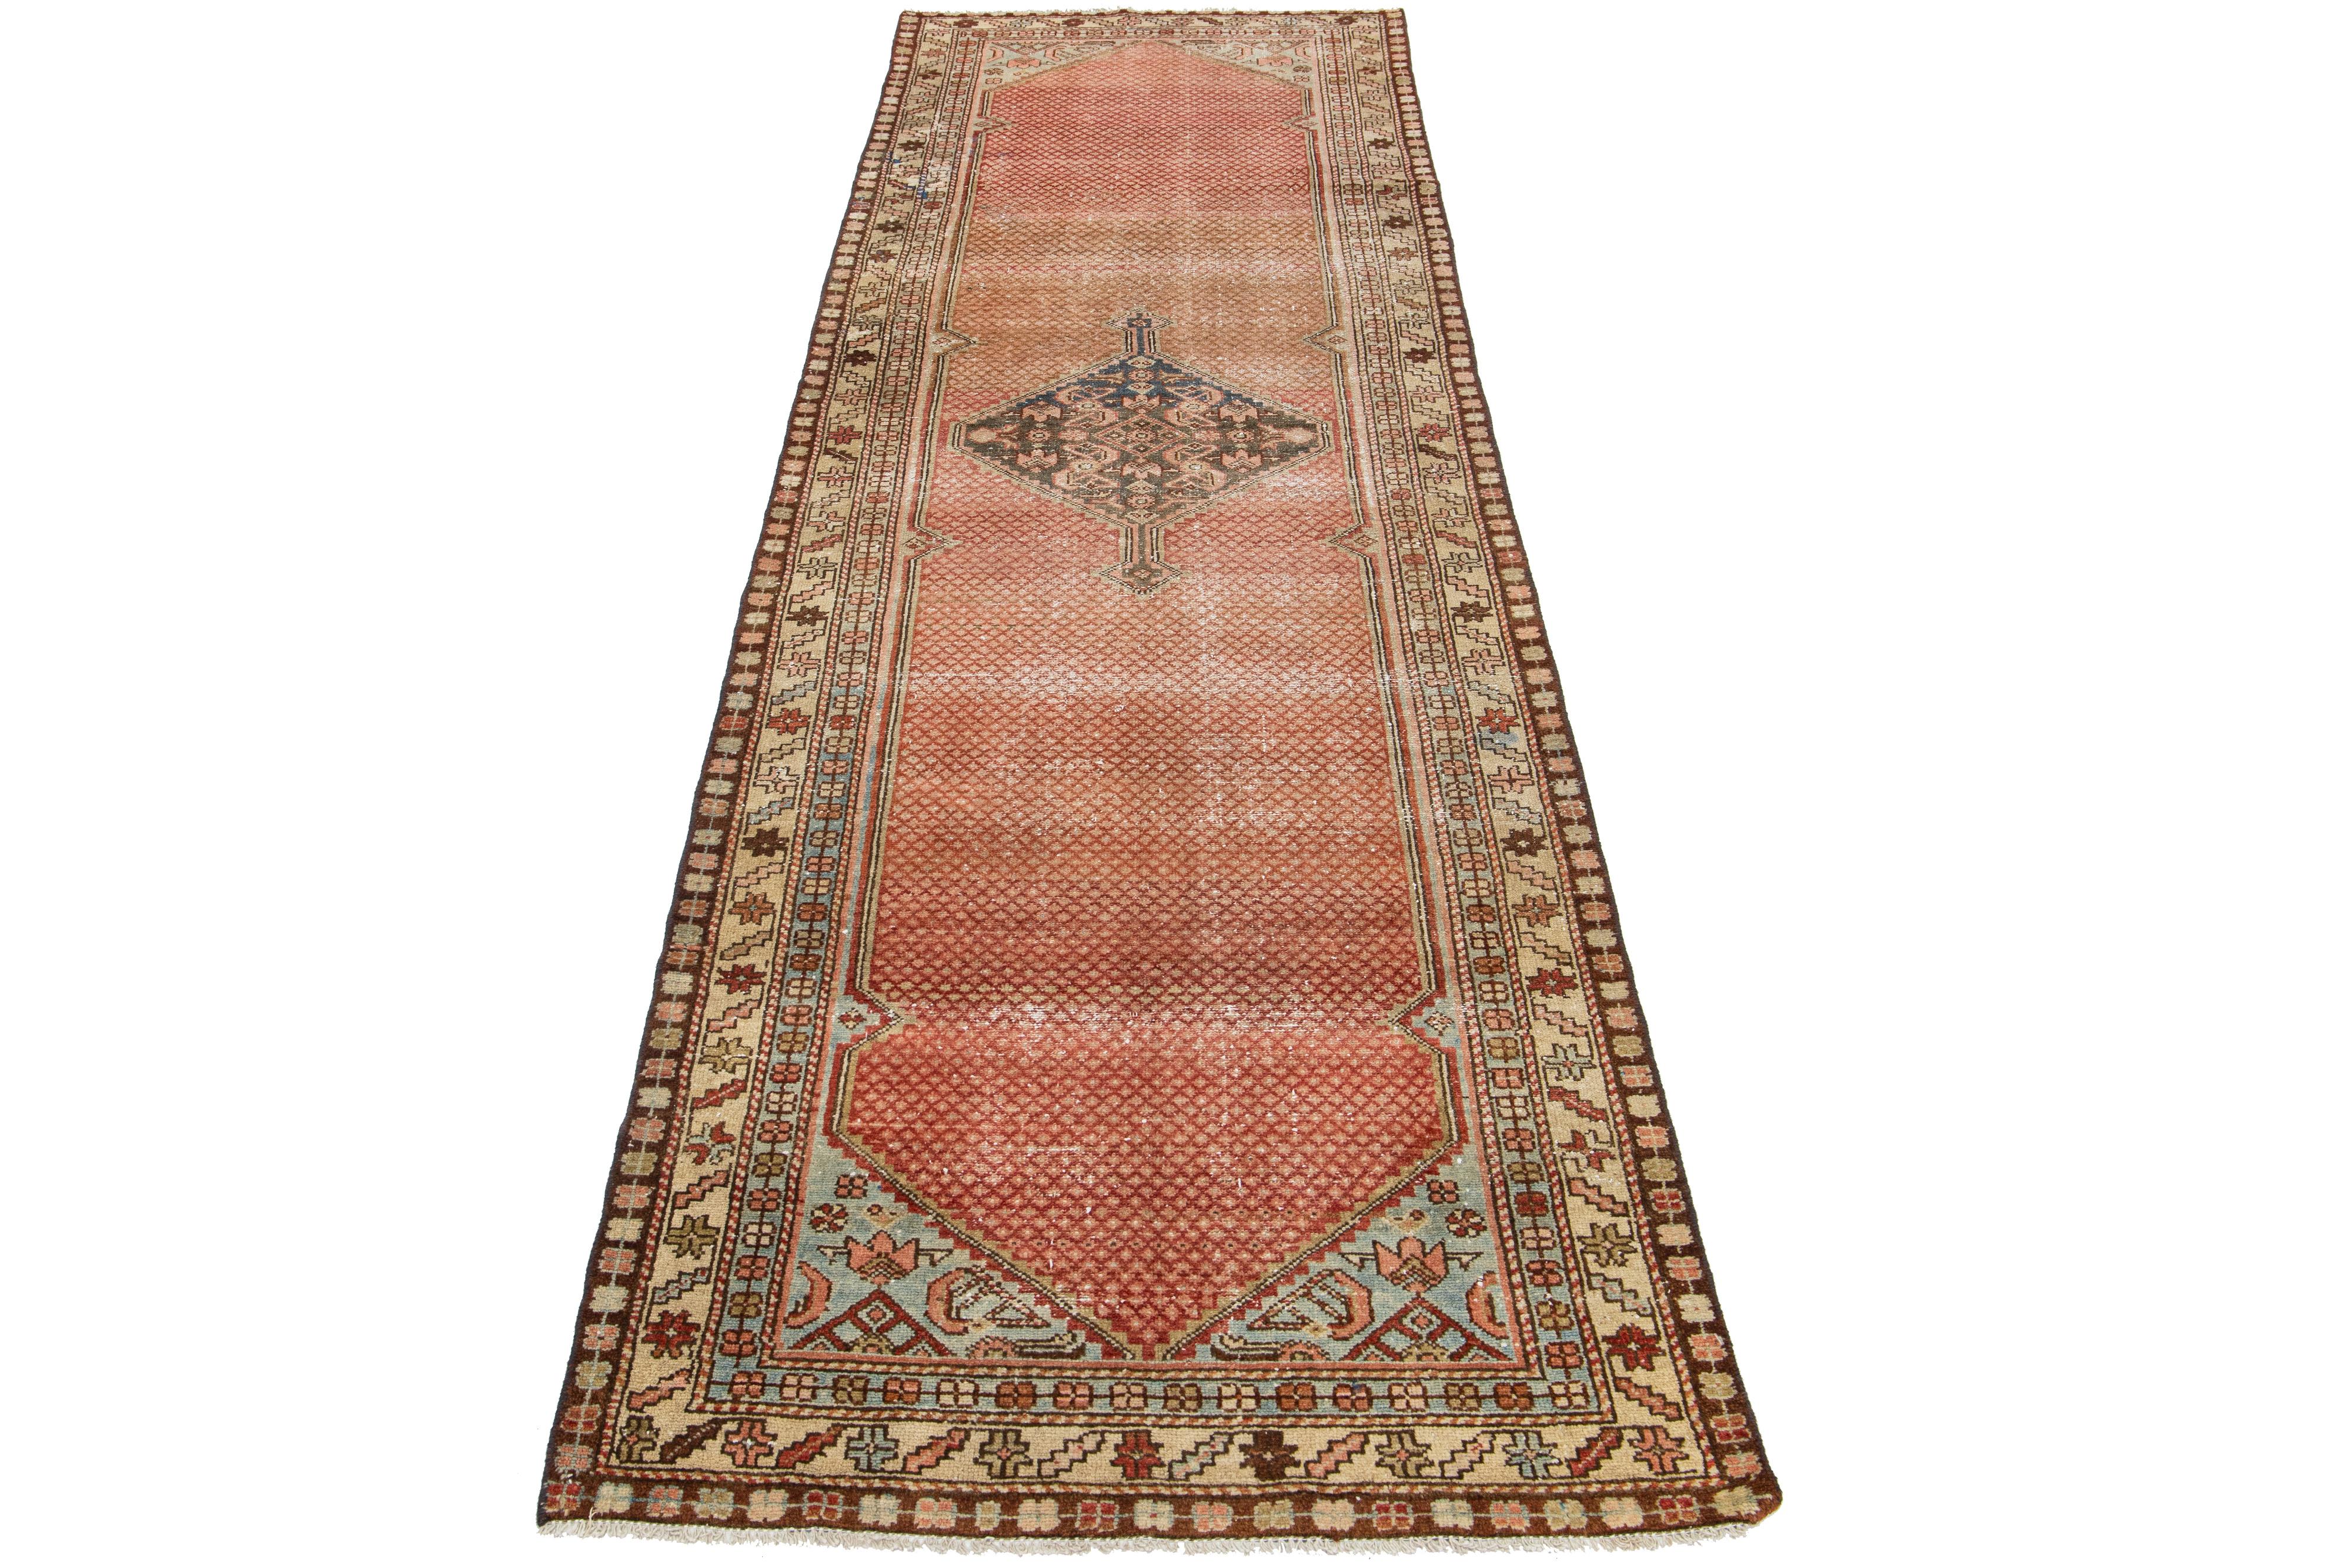 This antique Hamadan rug is hand-knotted from premium wool, boasting a rust field complemented by a captivating, all-over pattern design with blue and brown accents.

This rug measures 3'3